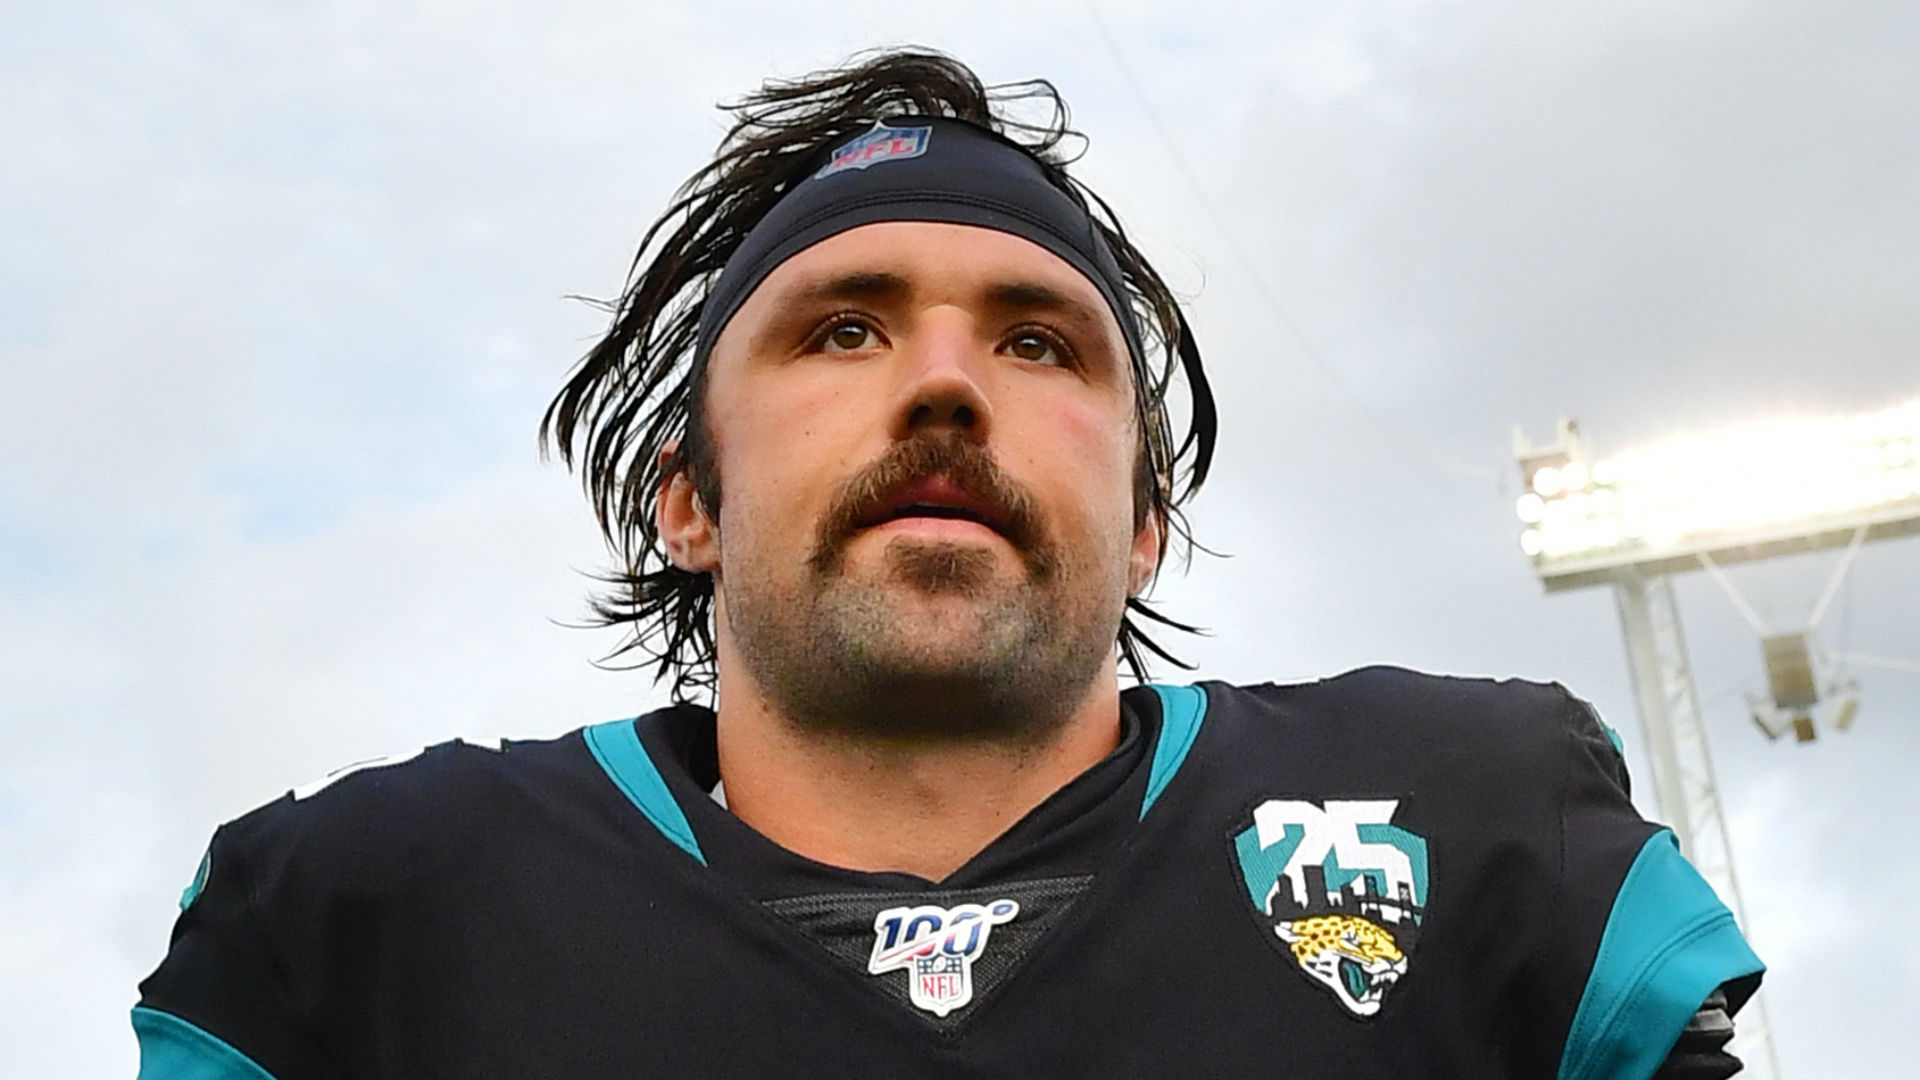 After starting Nick Foles for the past three weeks, the Jacksonville Jaguars are turning back to rookie quarterback Gardner Minshew.